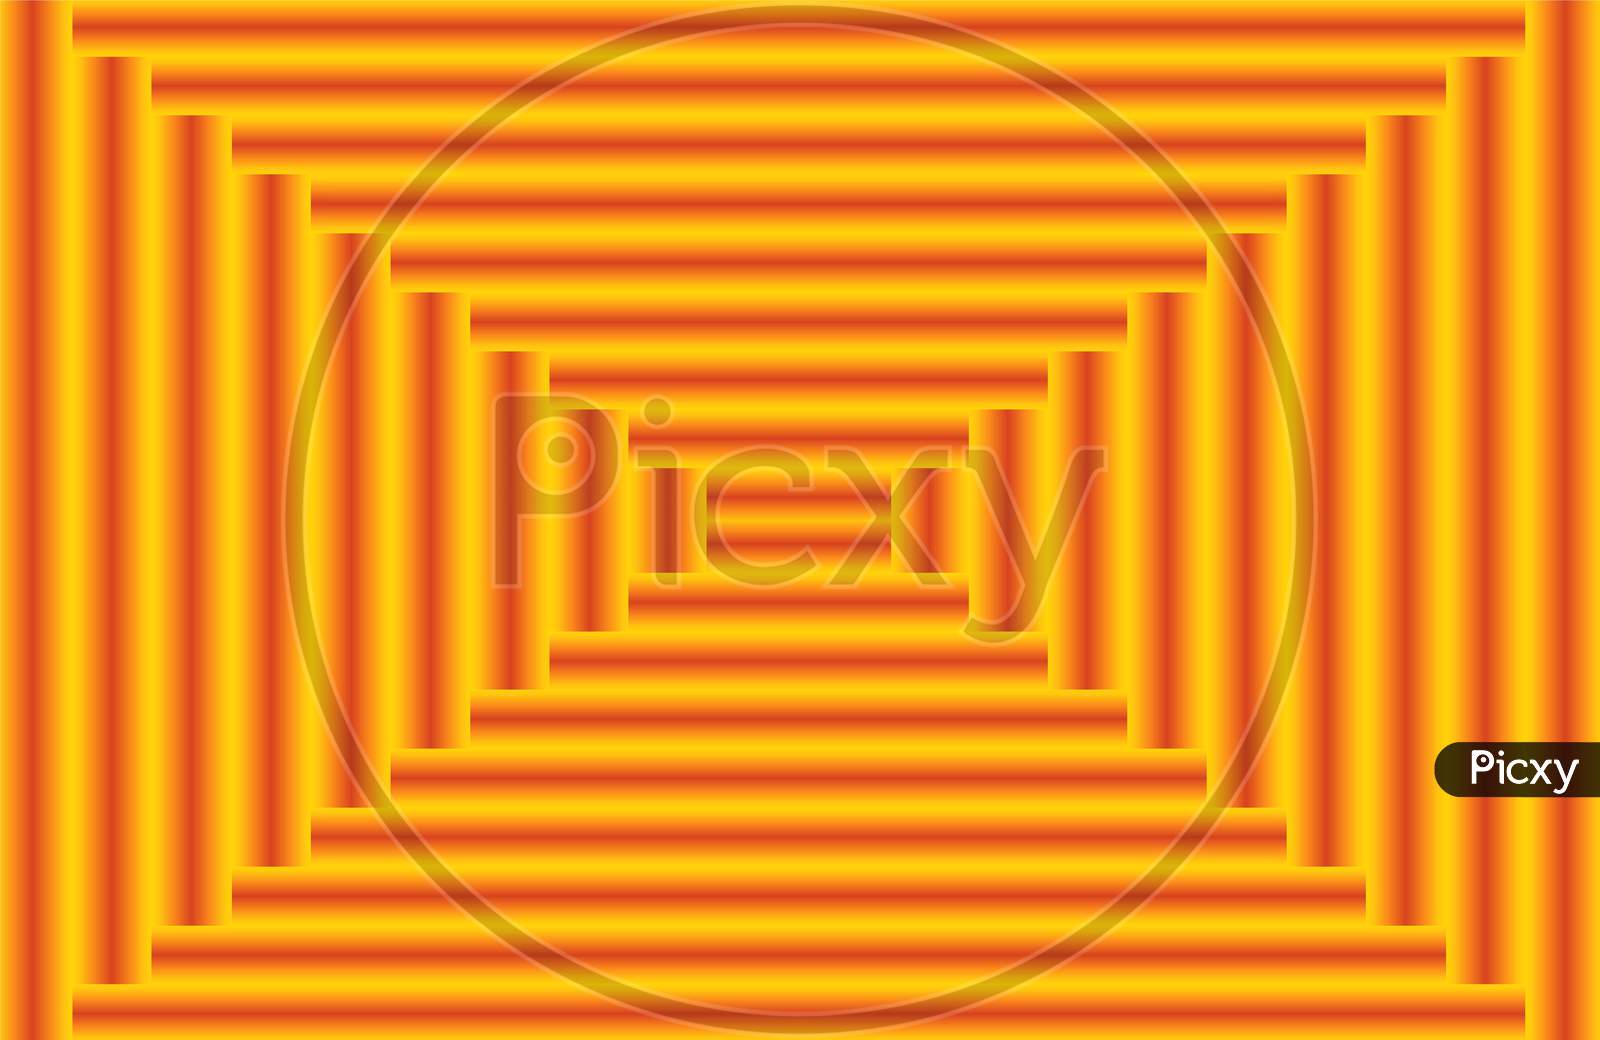 Square optical illusion. Seamless 3d red and yellow gradient striped square background. abstract layered line pattern square texture. From small to big. Square centered composition.